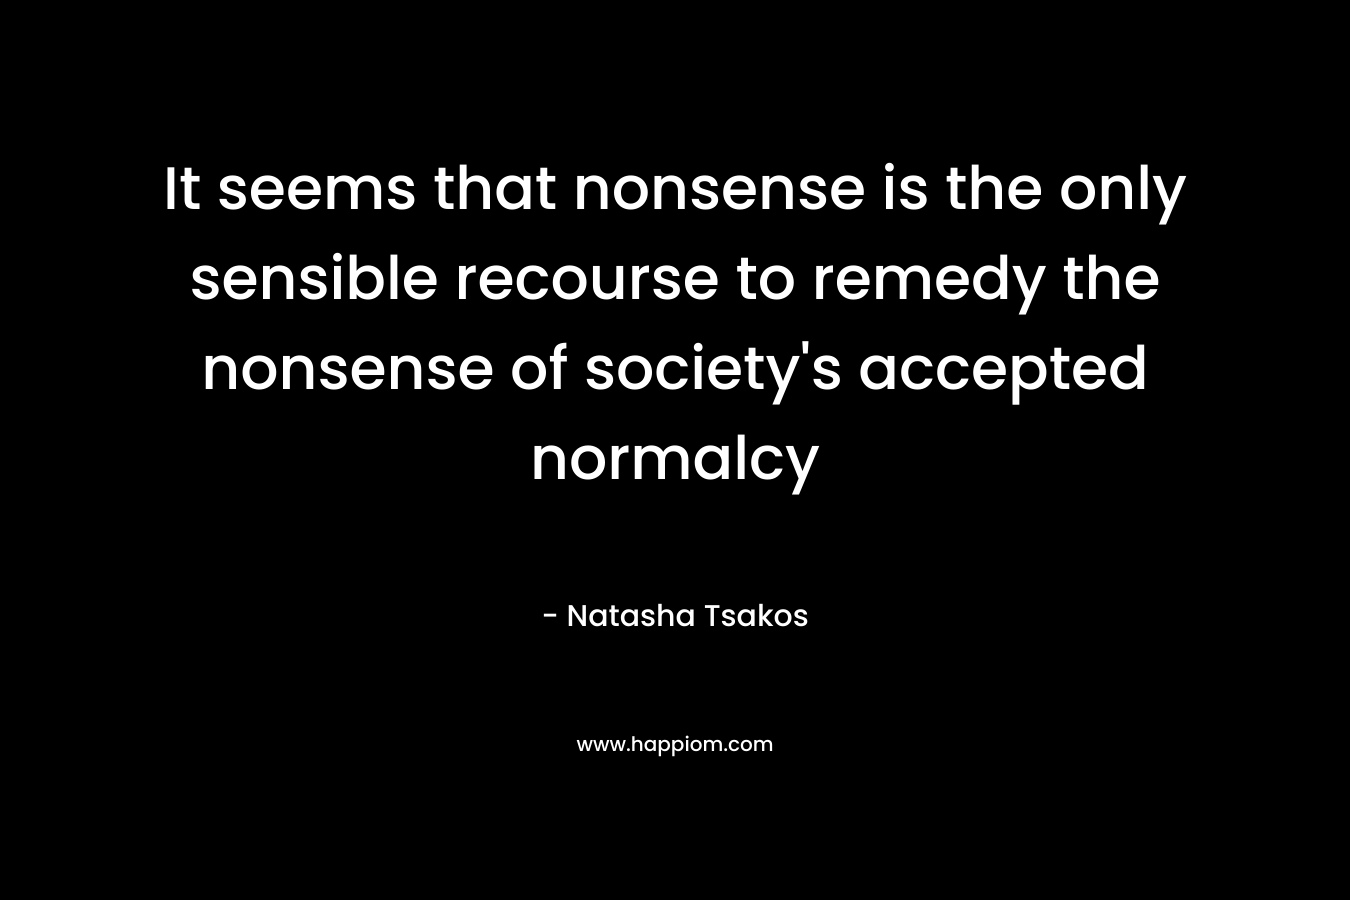 It seems that nonsense is the only sensible recourse to remedy the nonsense of society's accepted normalcy